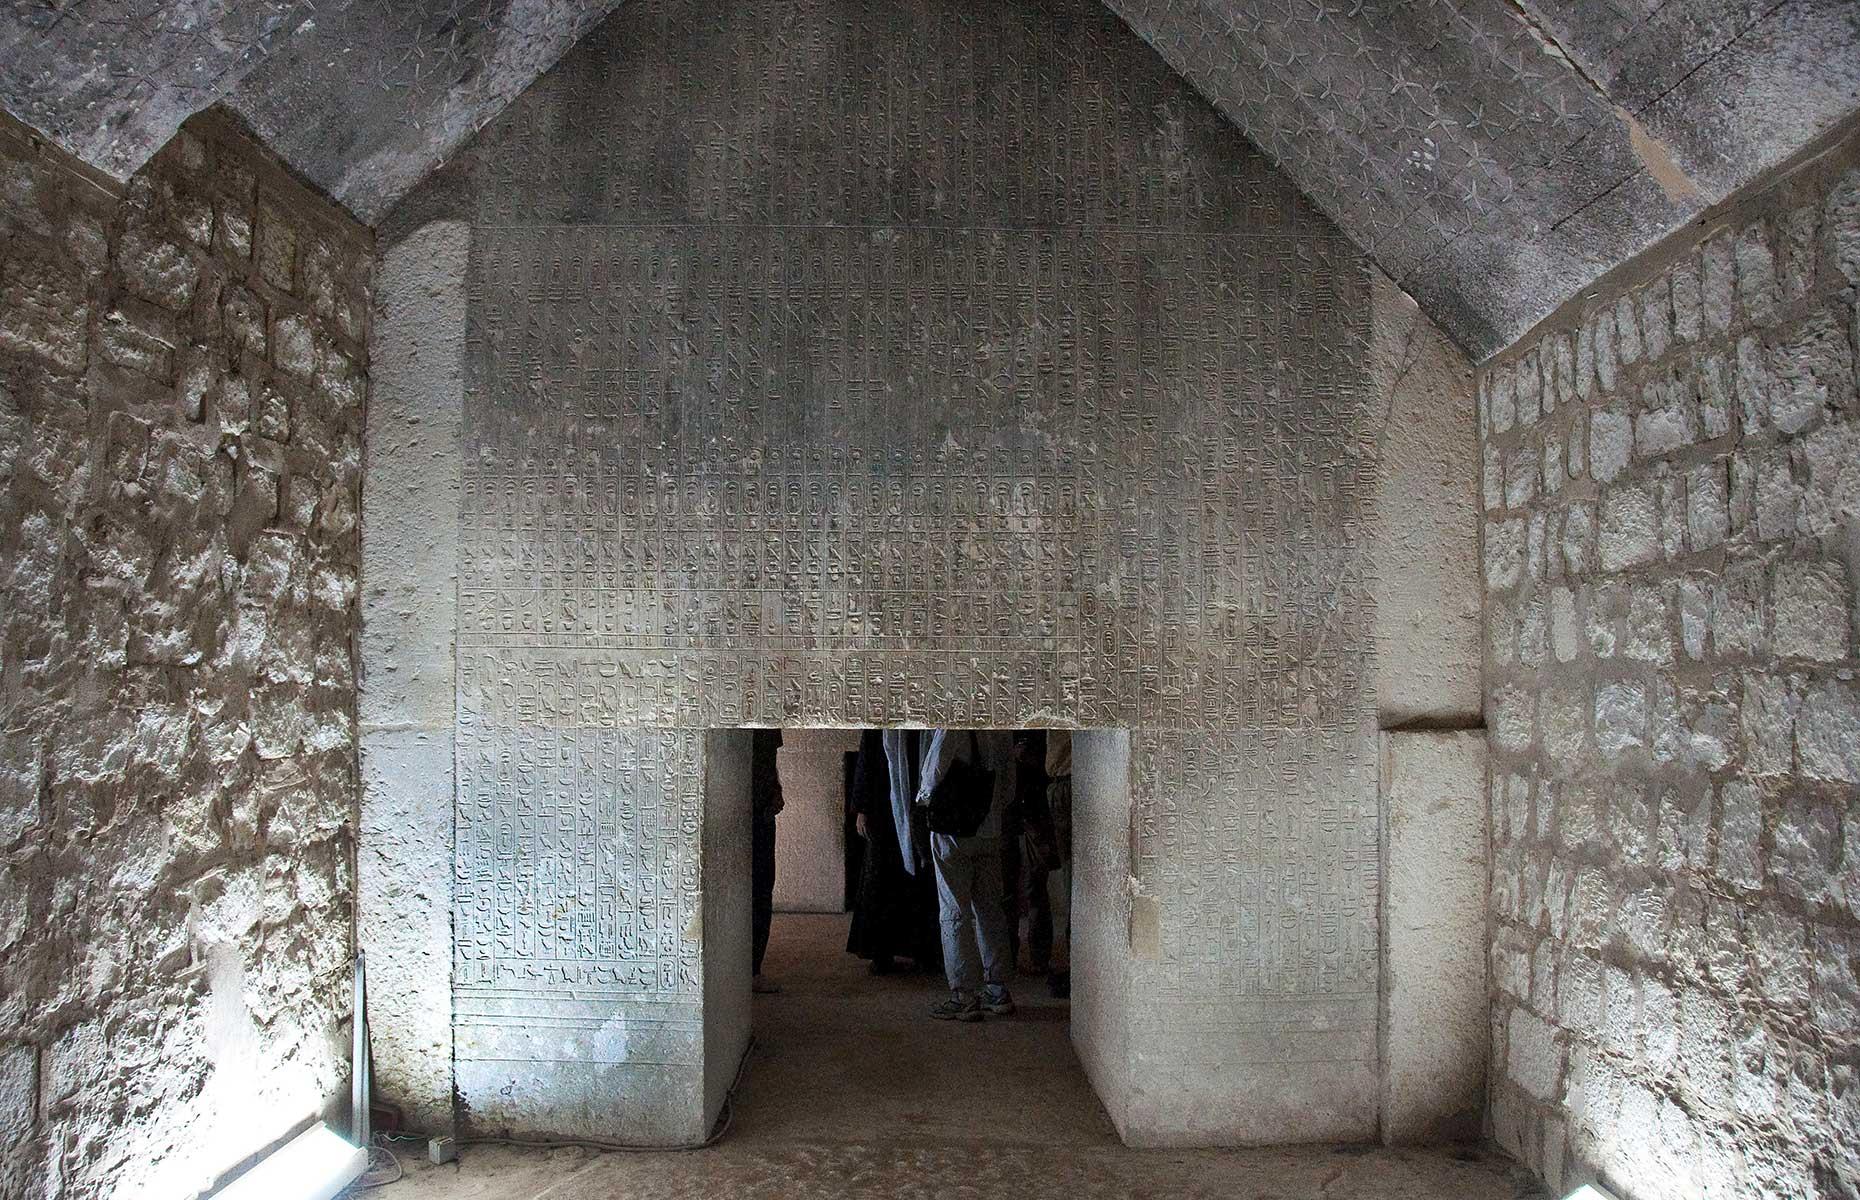 <p>Teti's burial chamber was located beneath the pyramid, along with his well-preserved basalt sarcophagus. Like the Unas Pyramid, the Teti Pyramid's walls <a href="http://www.ancient-egypt.org/history/old-kingdom/6th-dynasty/teti/pyramid-complex-of-teti/pyramid-of-teti.html">were also adorned with pyramid texts</a>. These funerary texts first appeared in the Fifth Dynasty of the Old Kingdom (2465-2323 BC), and were succeeded by so-called 'coffin texts' during the Middle Kingdom (inscriptions found inside sarcophagi that tended to focus on the underworld). Both went on to influence the New Kingdom's Book of the Dead.</p>  <p><strong>Read on to take a look at more finds discovered inside awe-inspiring royal tombs...</strong></p>